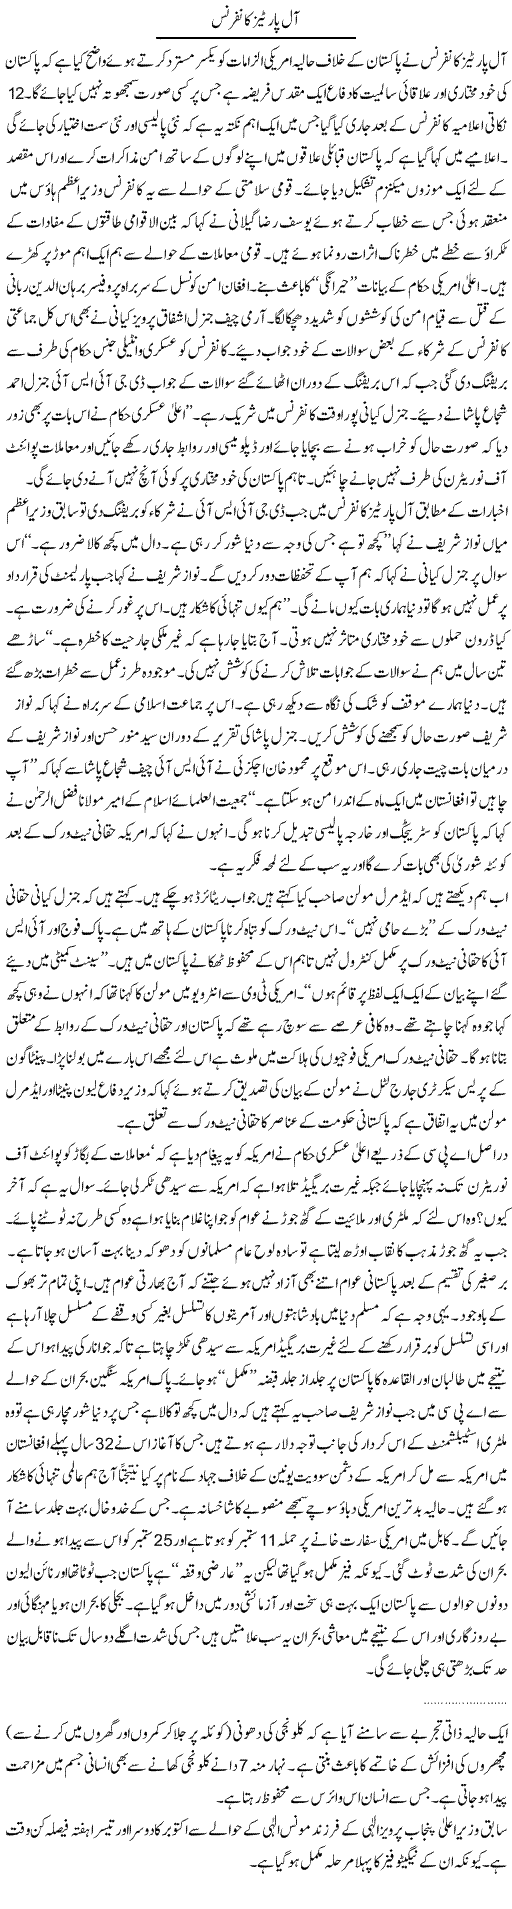 All Parties Conference Express Column Zamurd Naqvi 3 October 2011